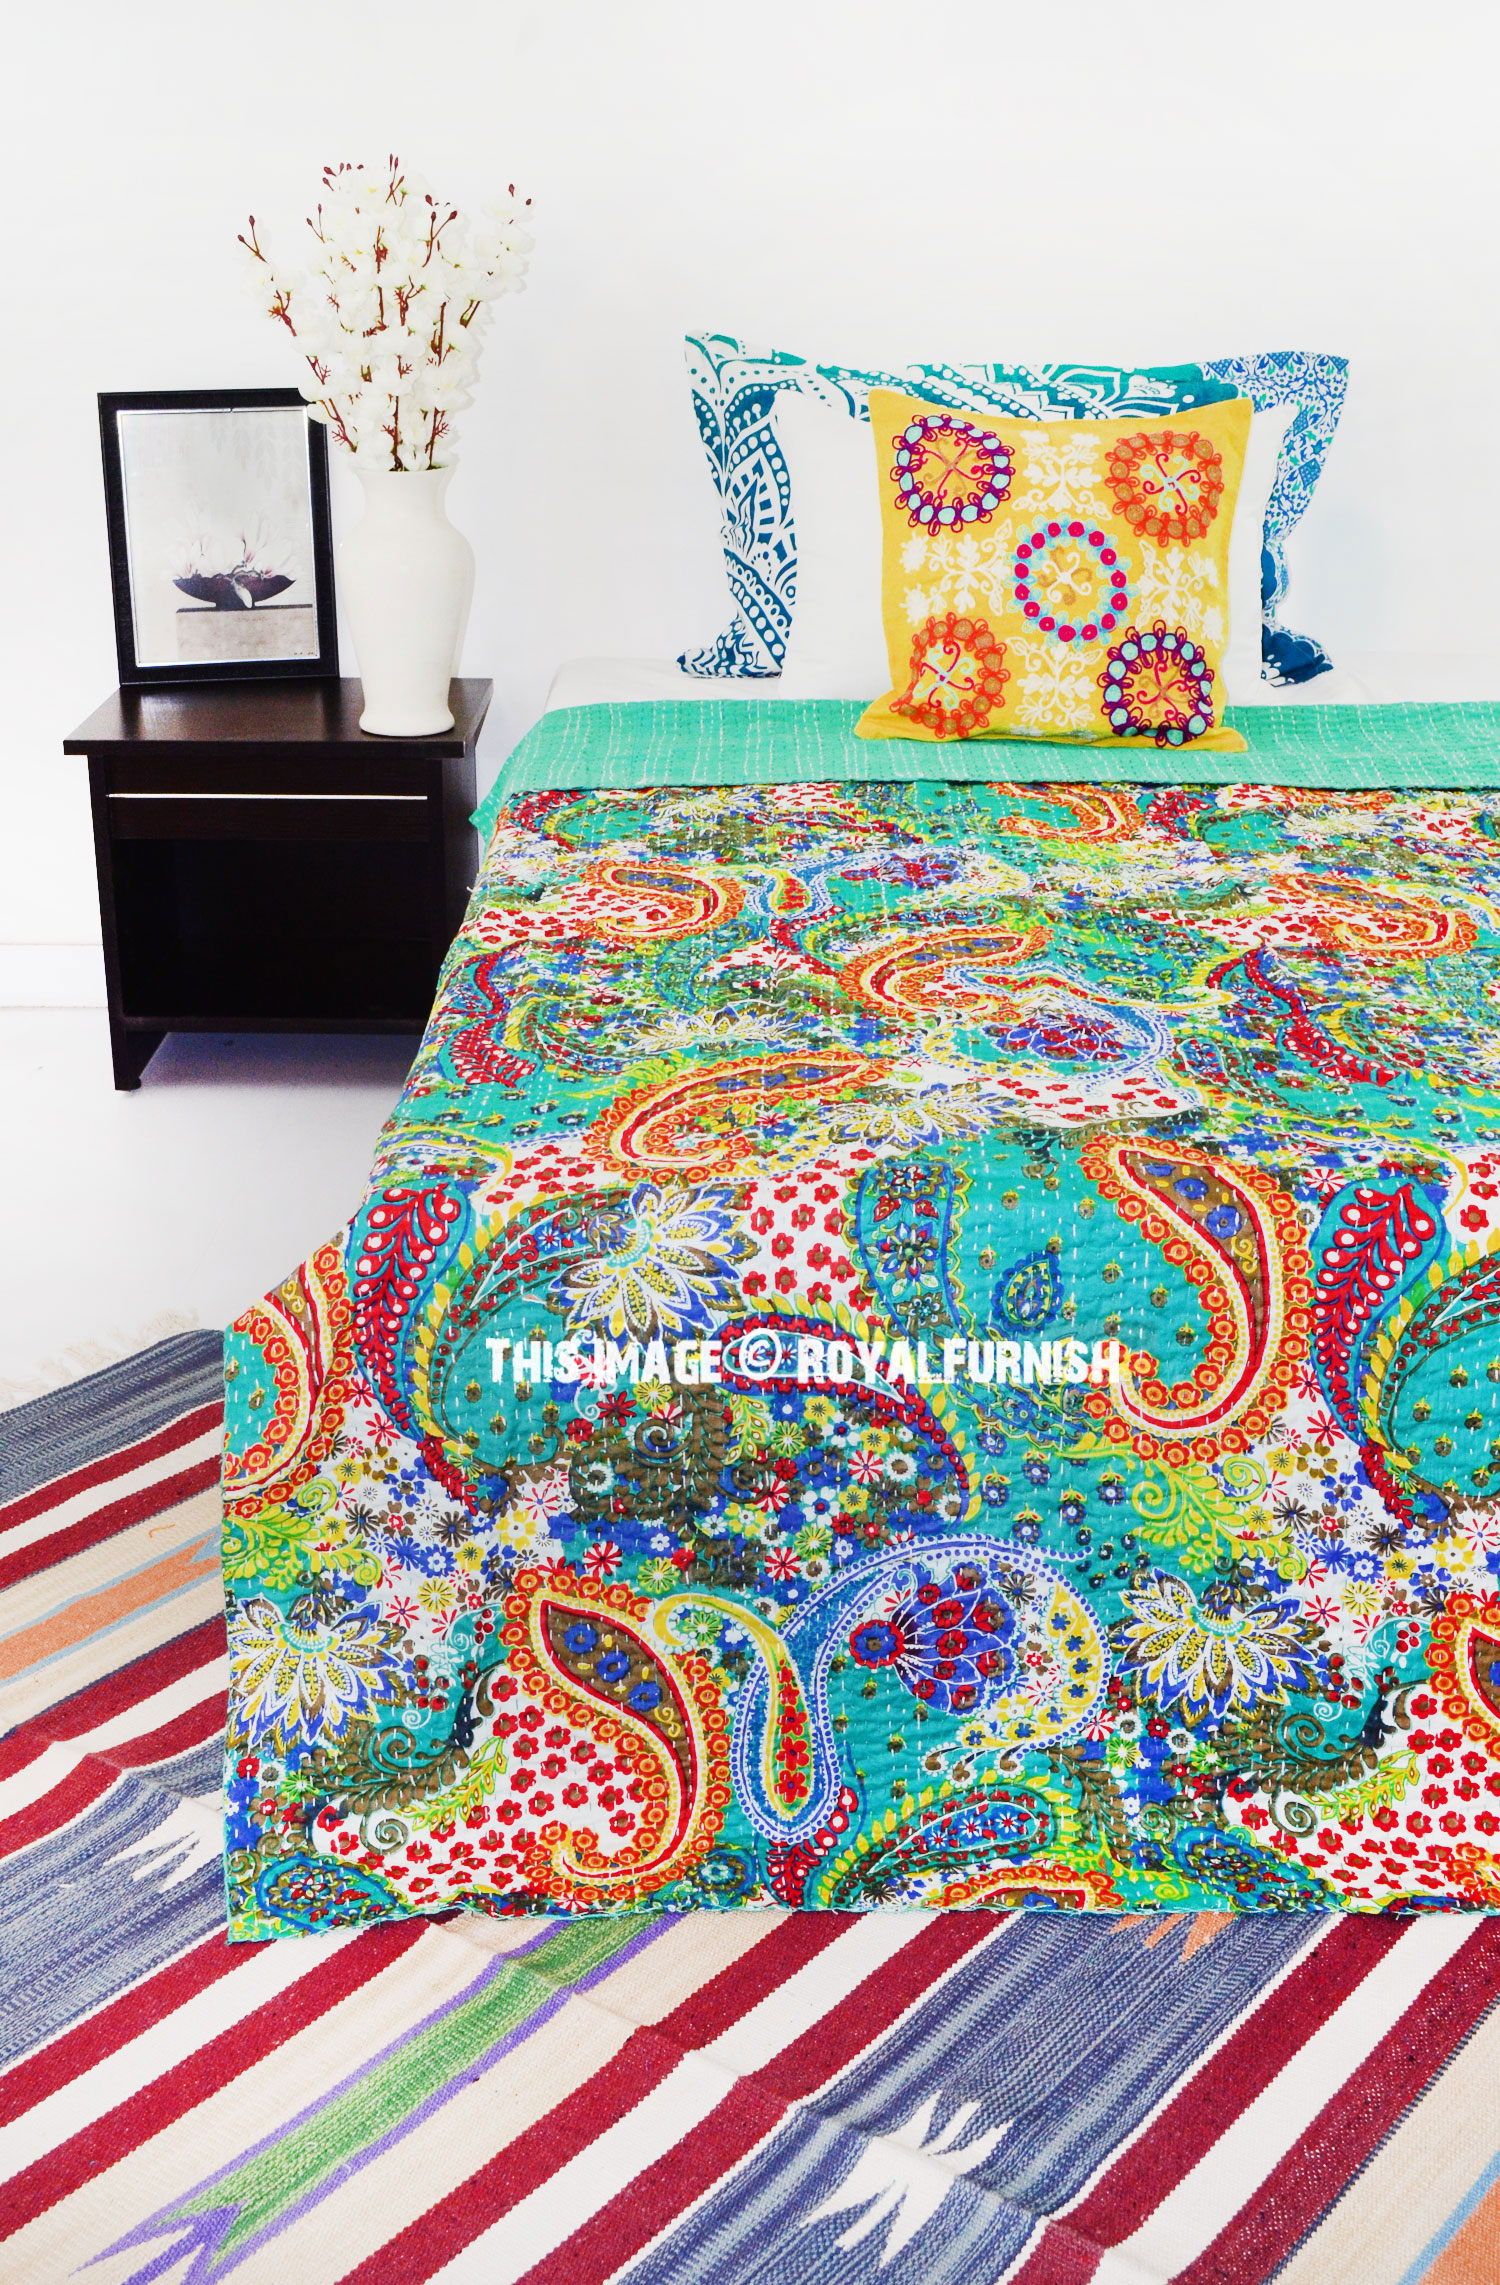 Details about   Indian Handmade Paisley-Print Cotton Kantha-Work Quilt Twin Bedspread Blanket 